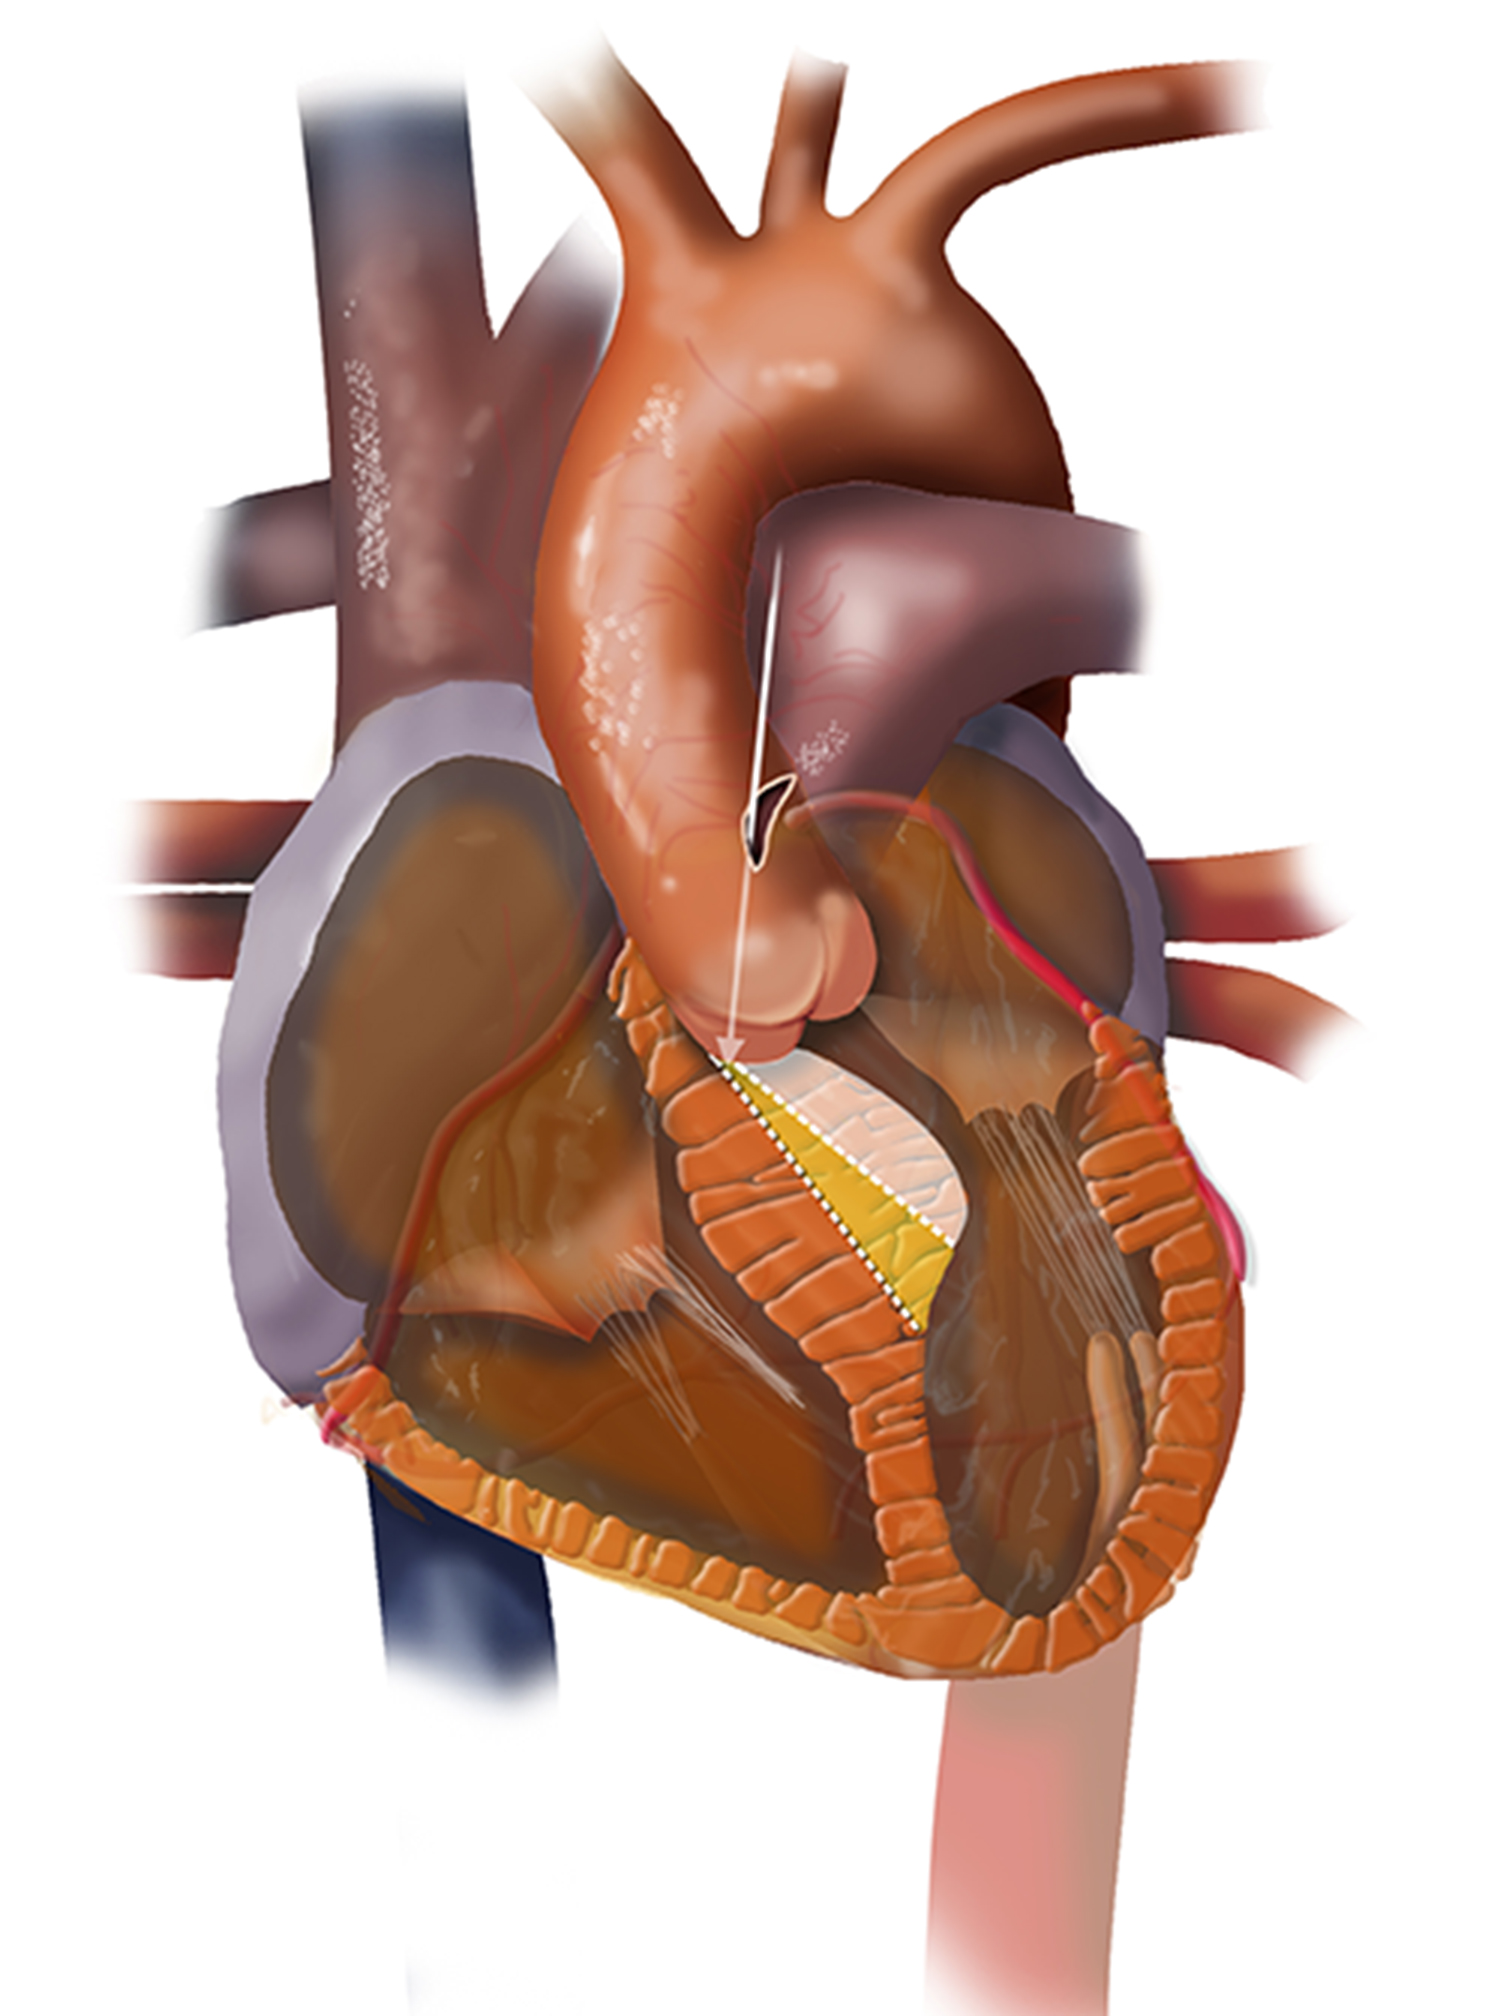 Cut-away view of the heart demonstrating myectomy resection